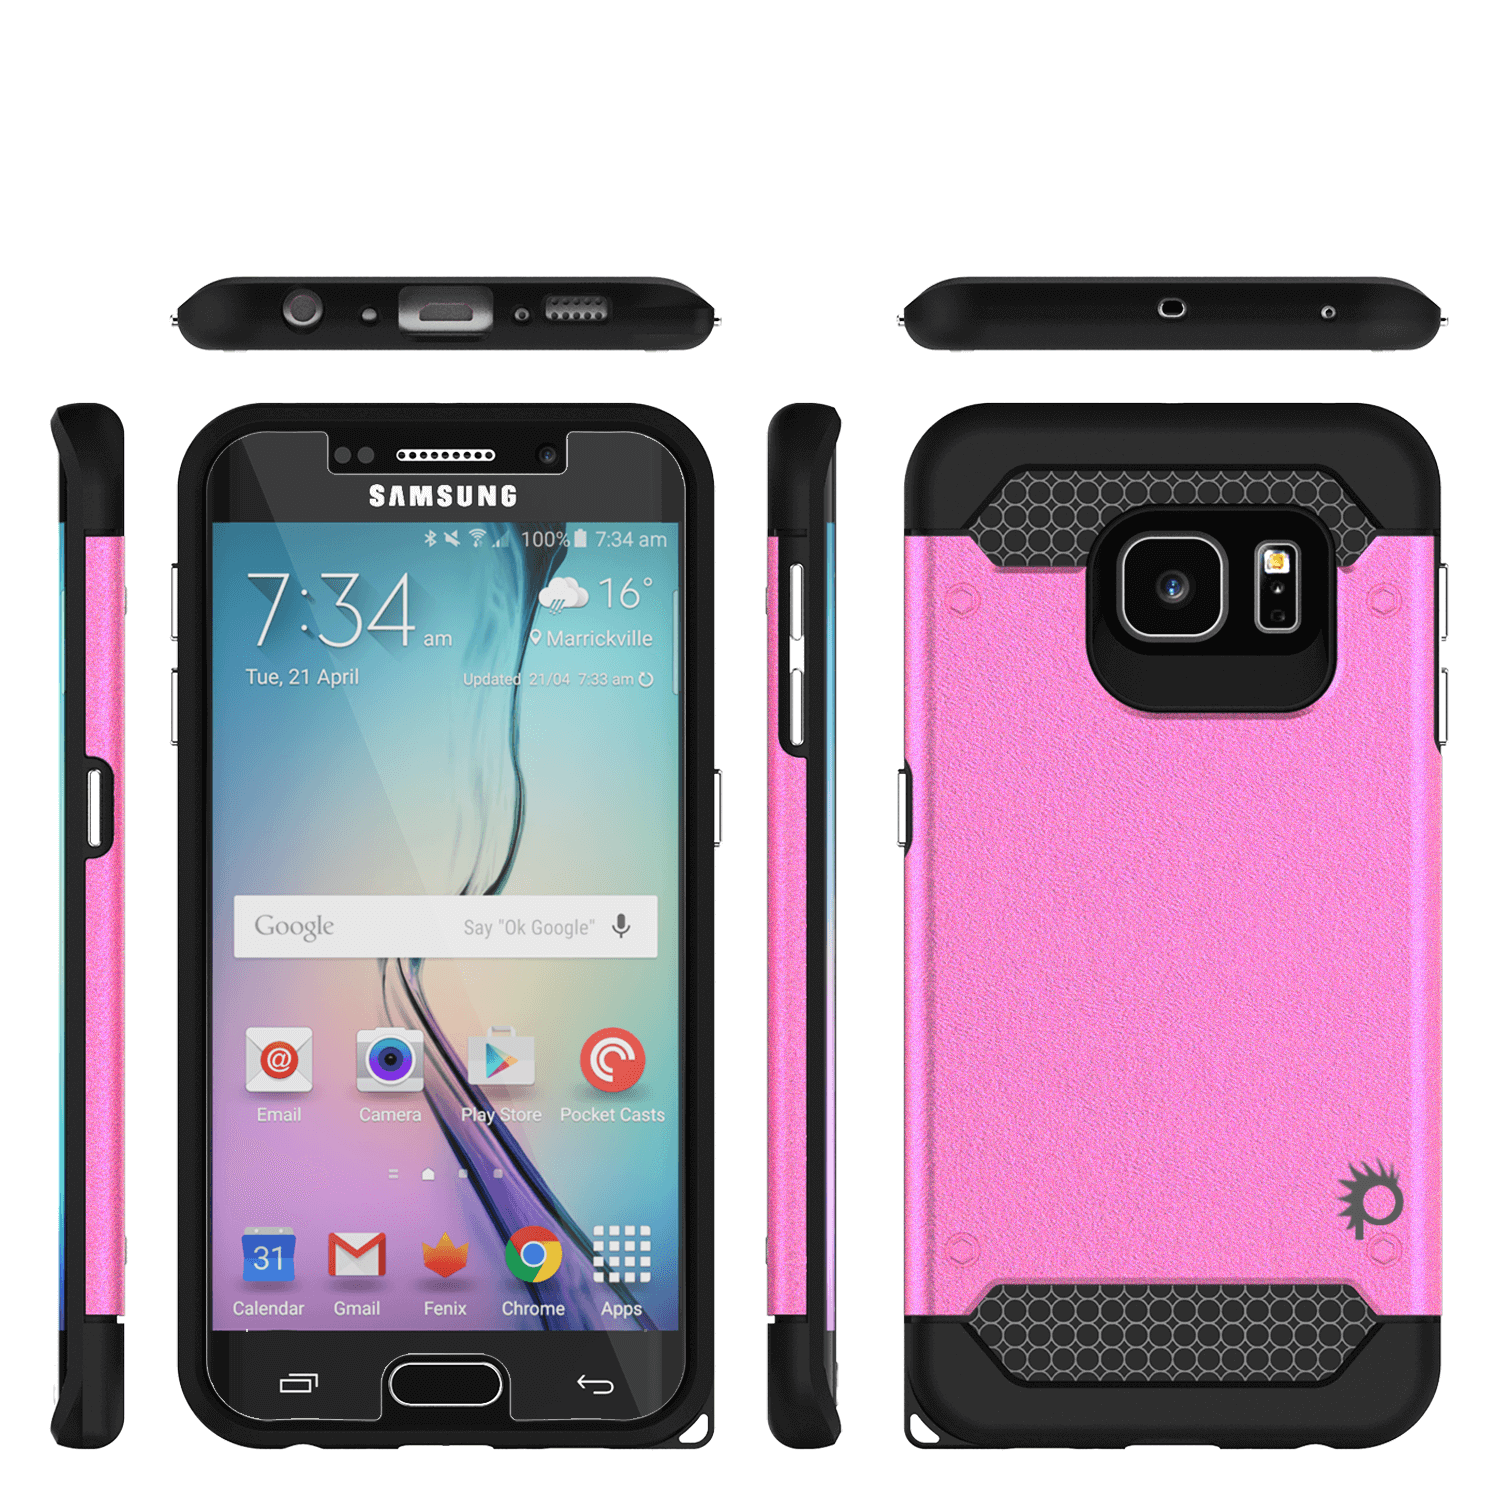 Galaxy s6 EDGE Case PunkCase Galactic Pink Series Slim Armor Soft Cover w/ Screen Protector